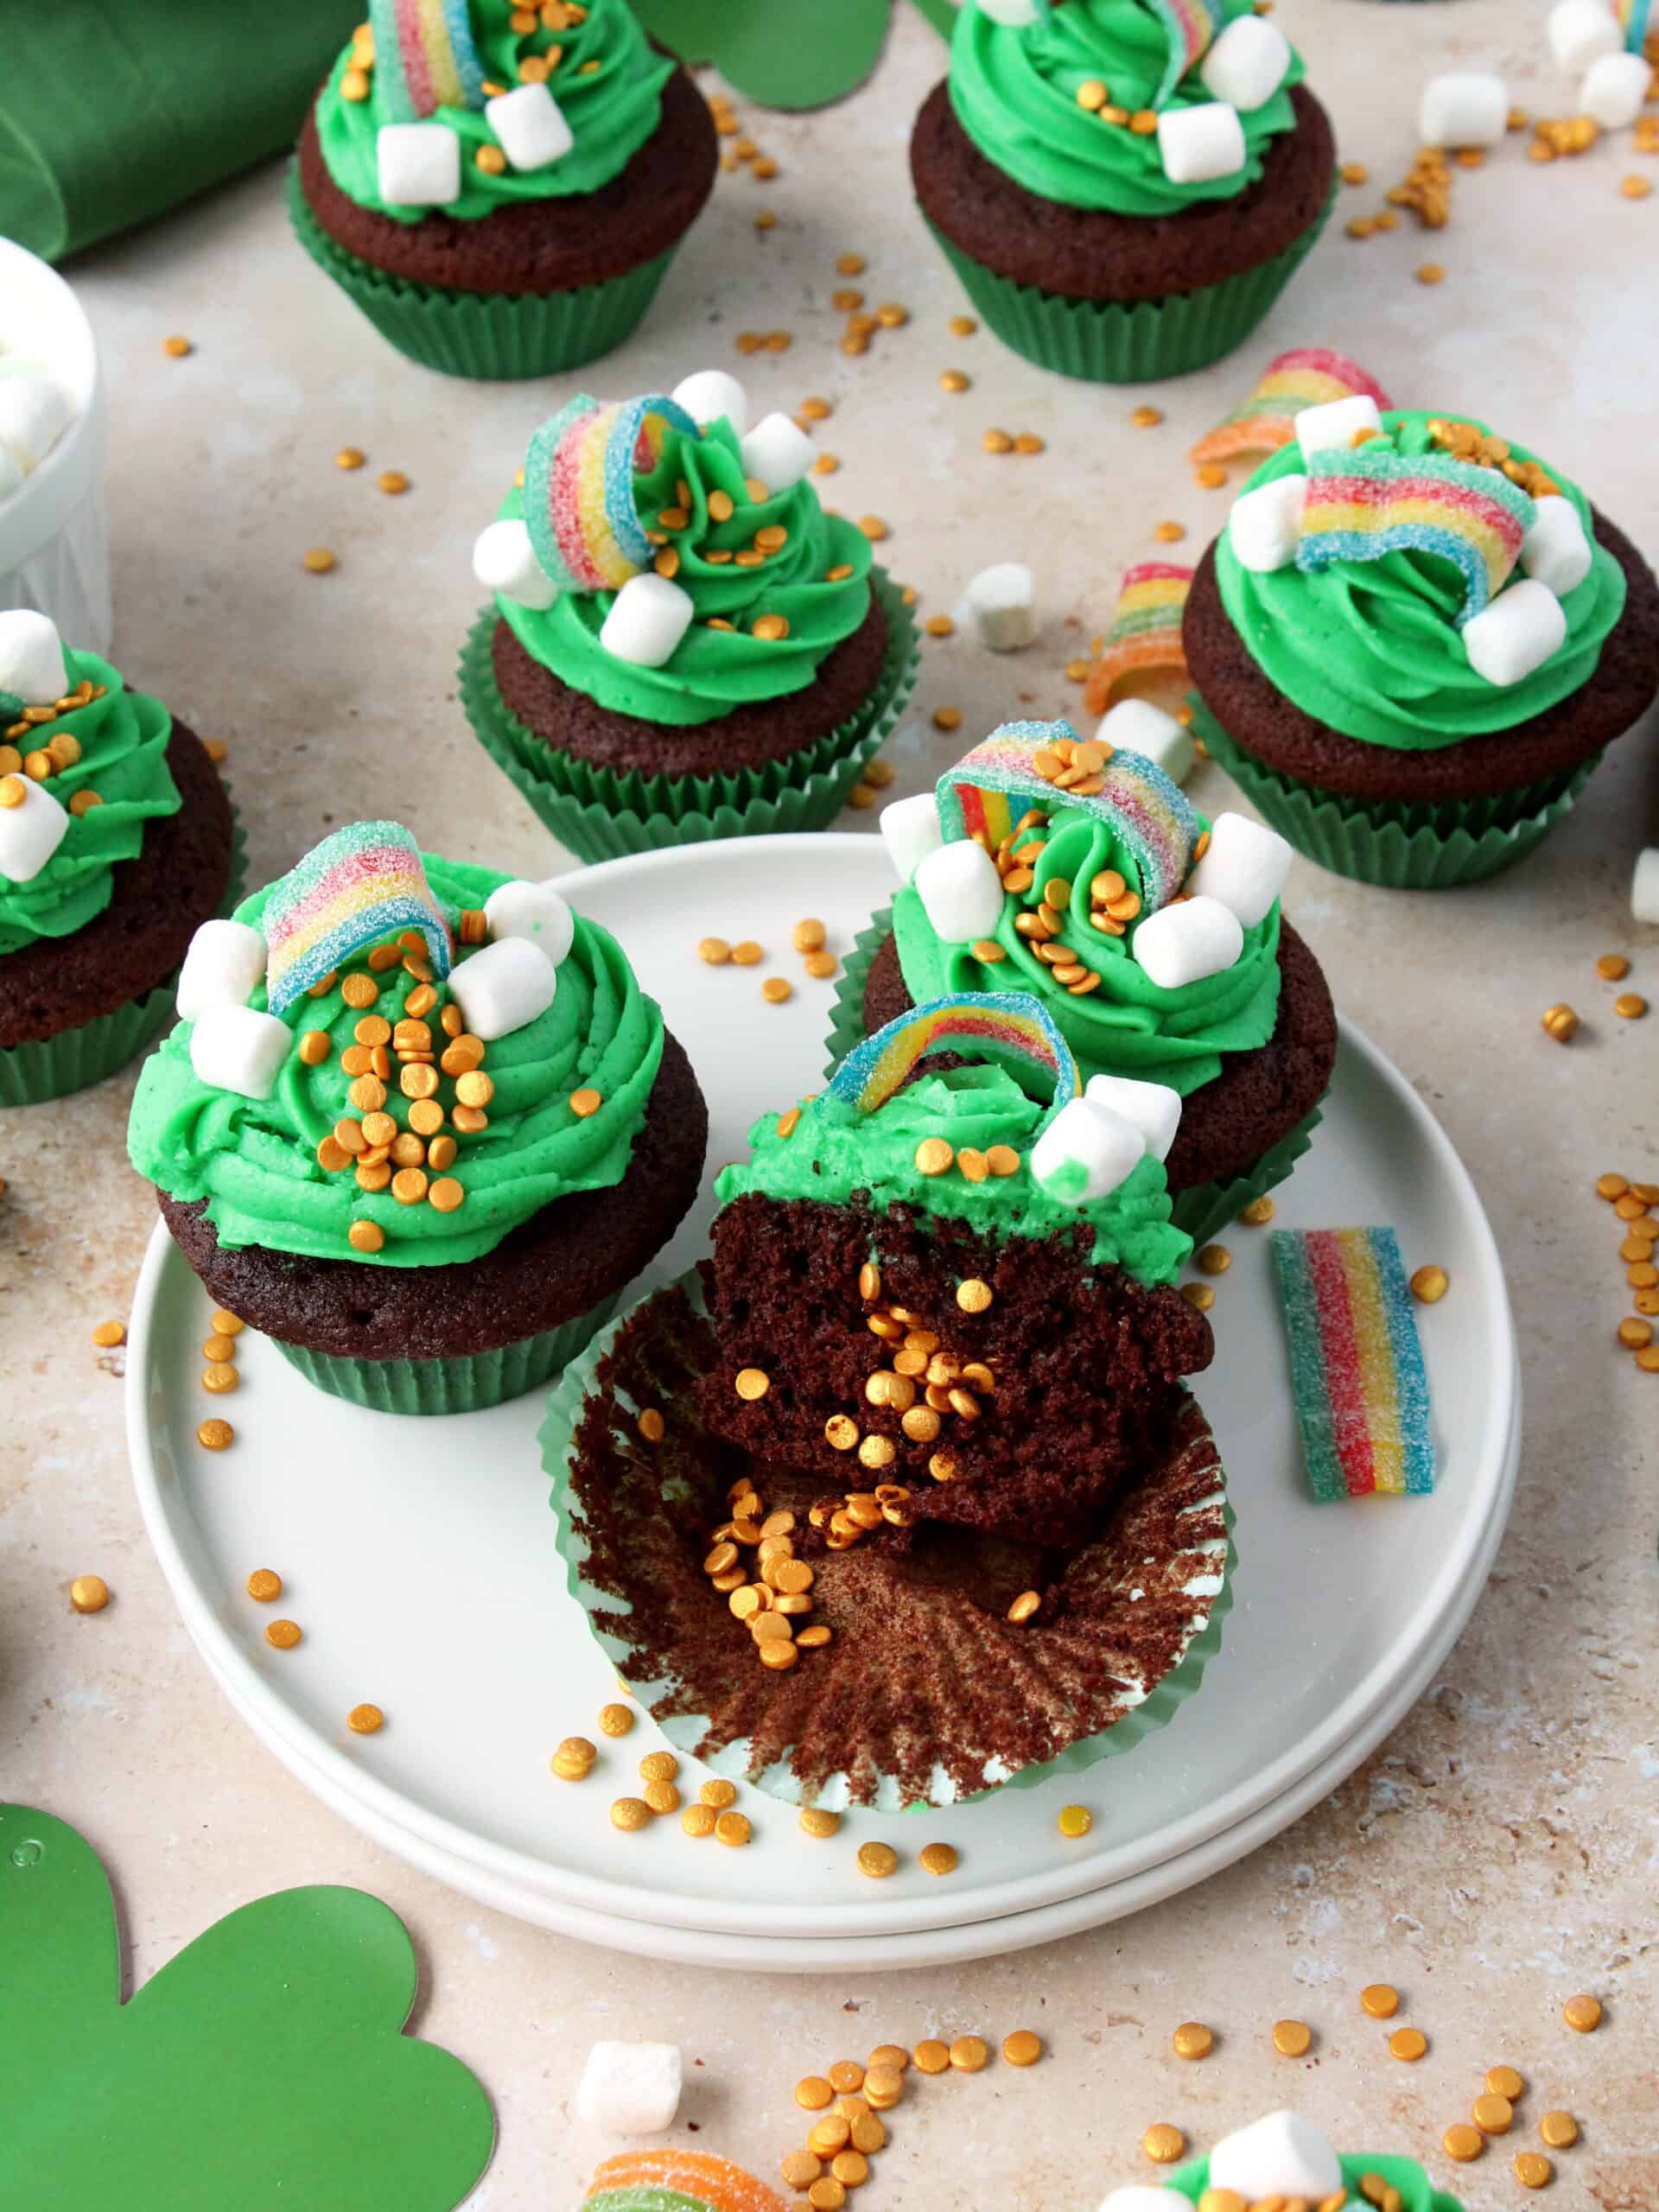 st patrick's day cupcakes decorated with green buttercream on white plate.